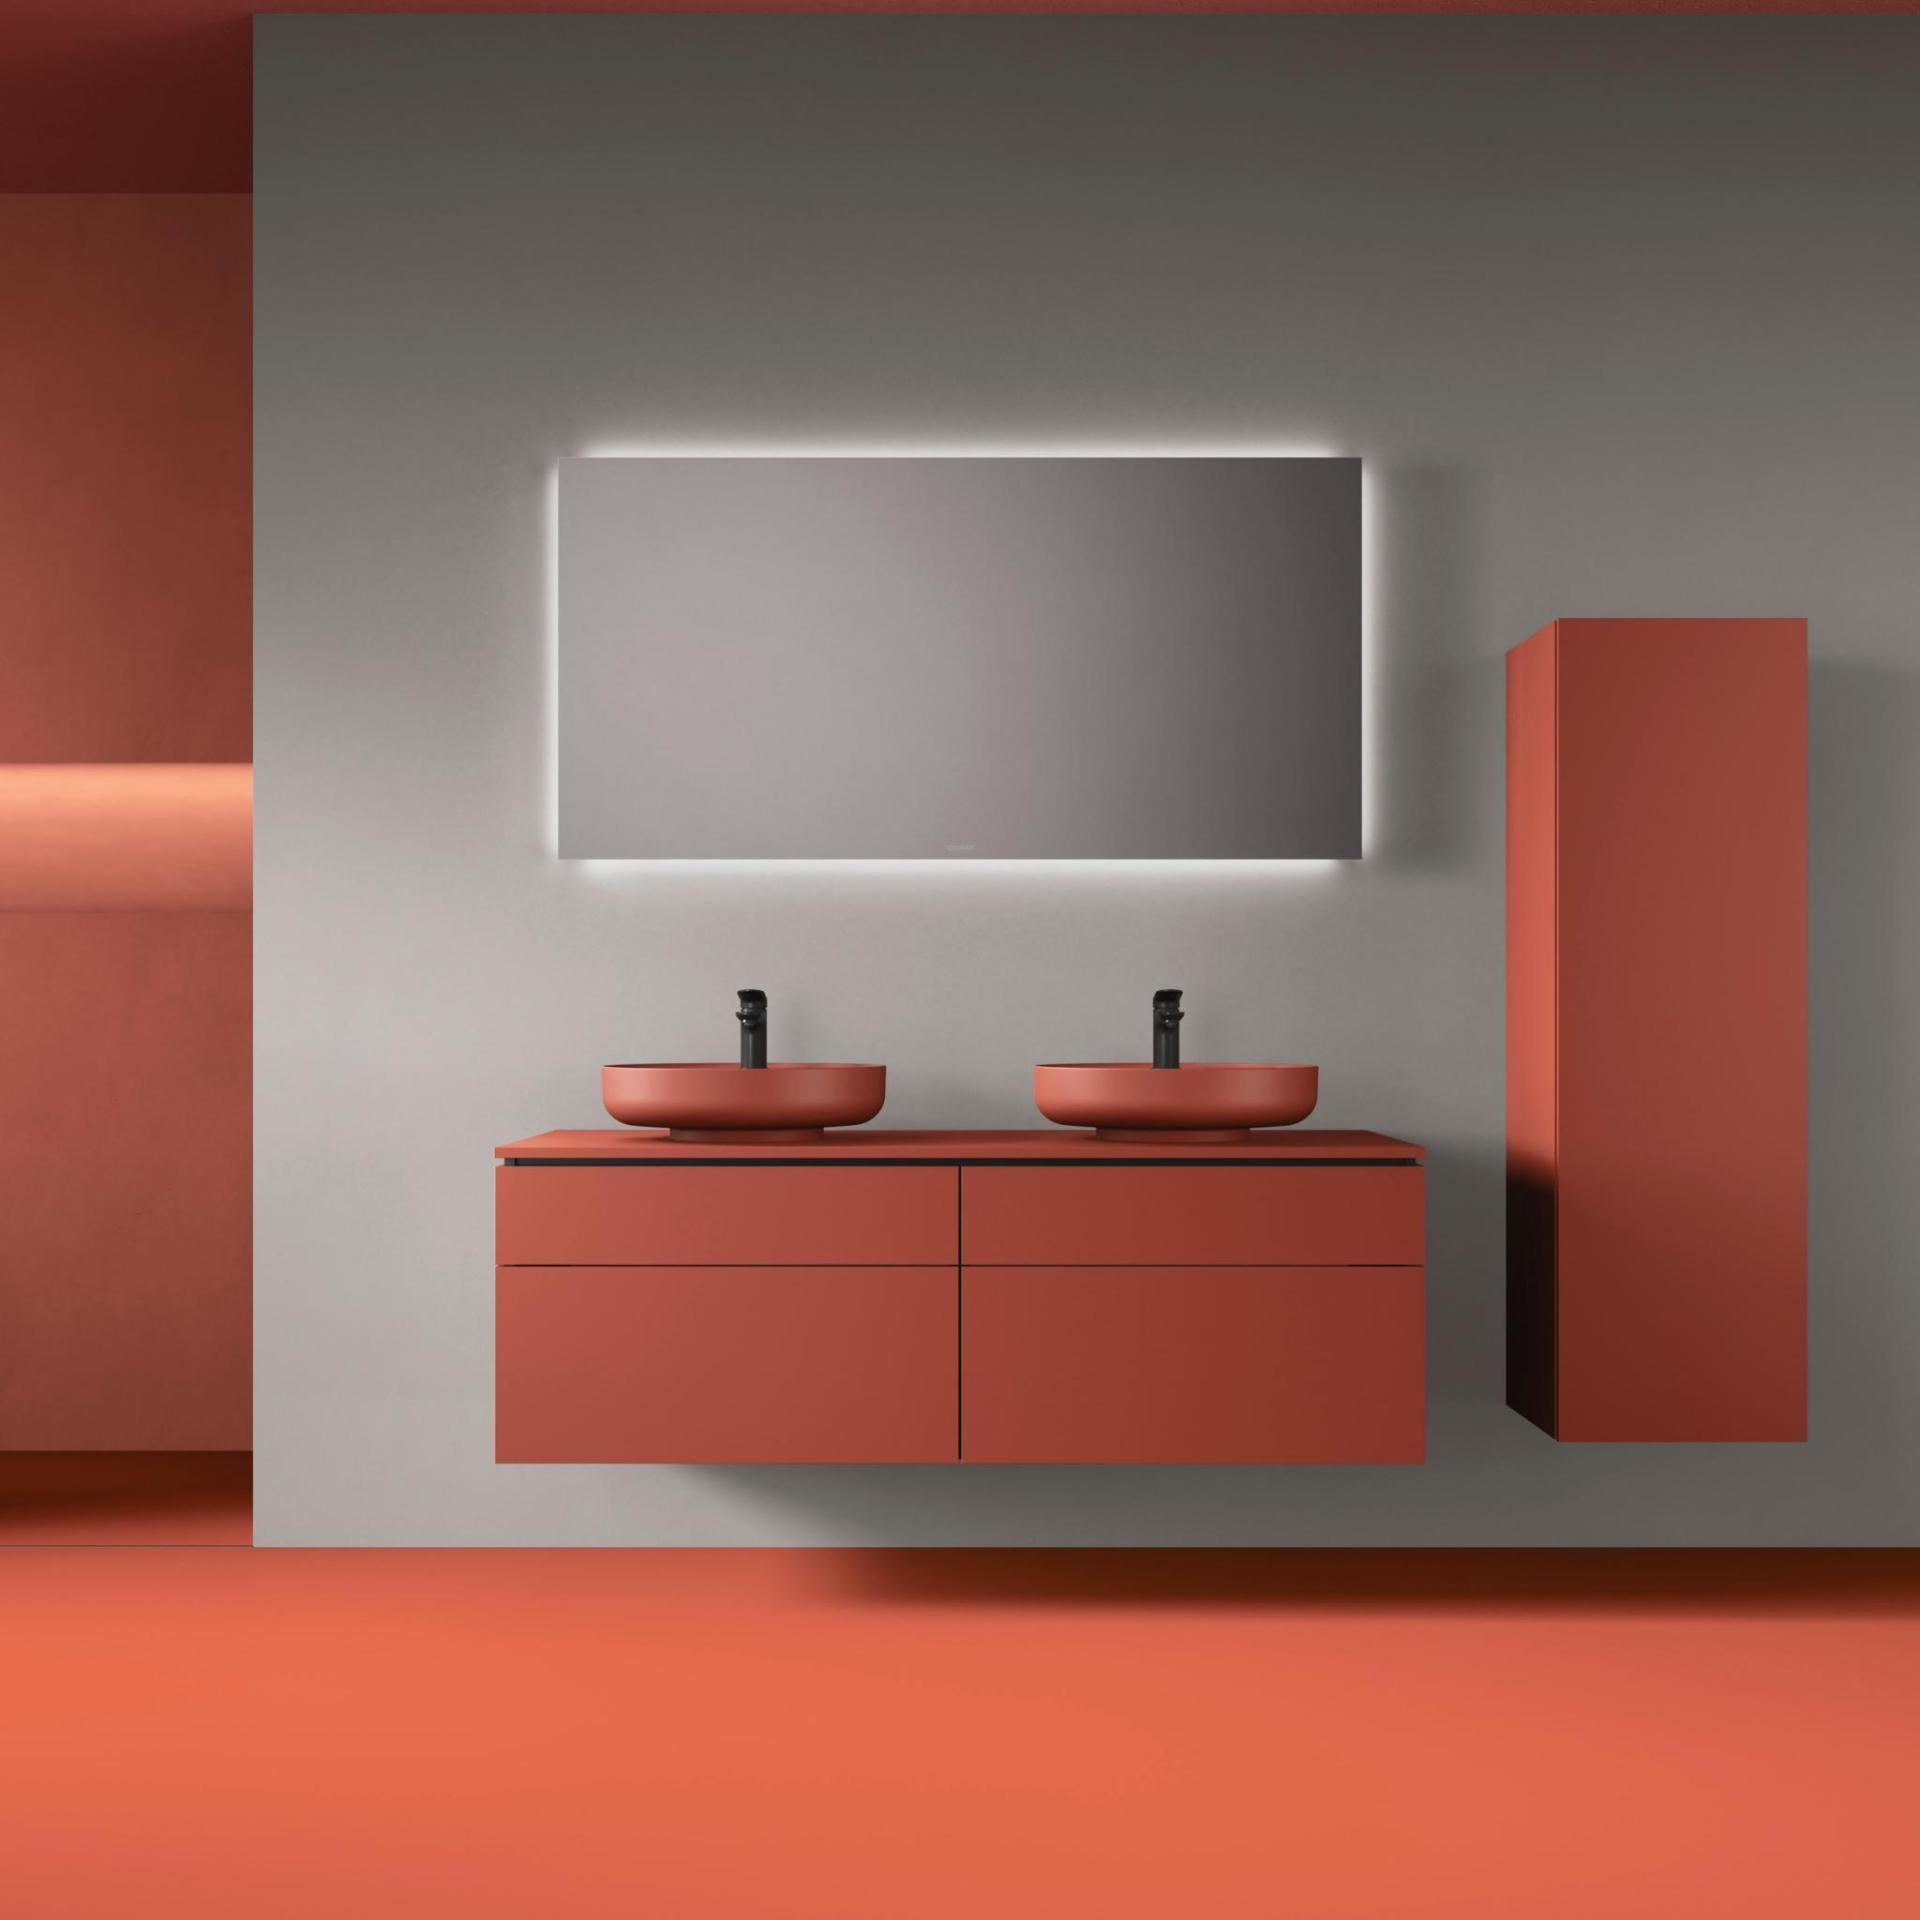 coloured sanitary ware in orange washbasin and cabinets in a bathroom with mirror